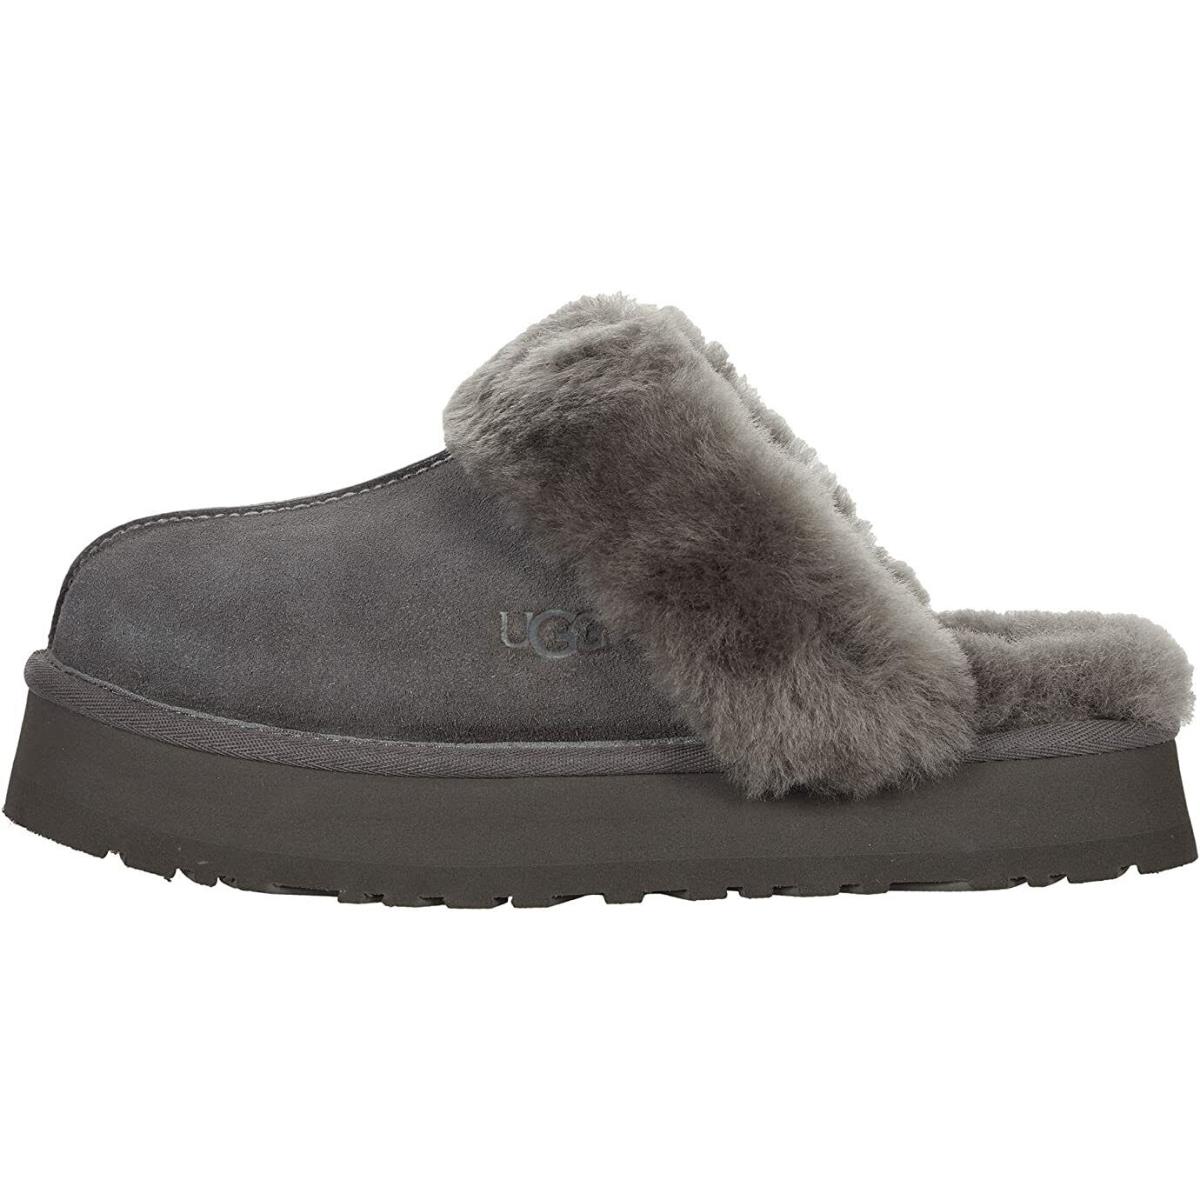 Women`s Shoes Ugg Disquette Platform Sheepskin Suede Slippers 1122550 Charcoal - Gray